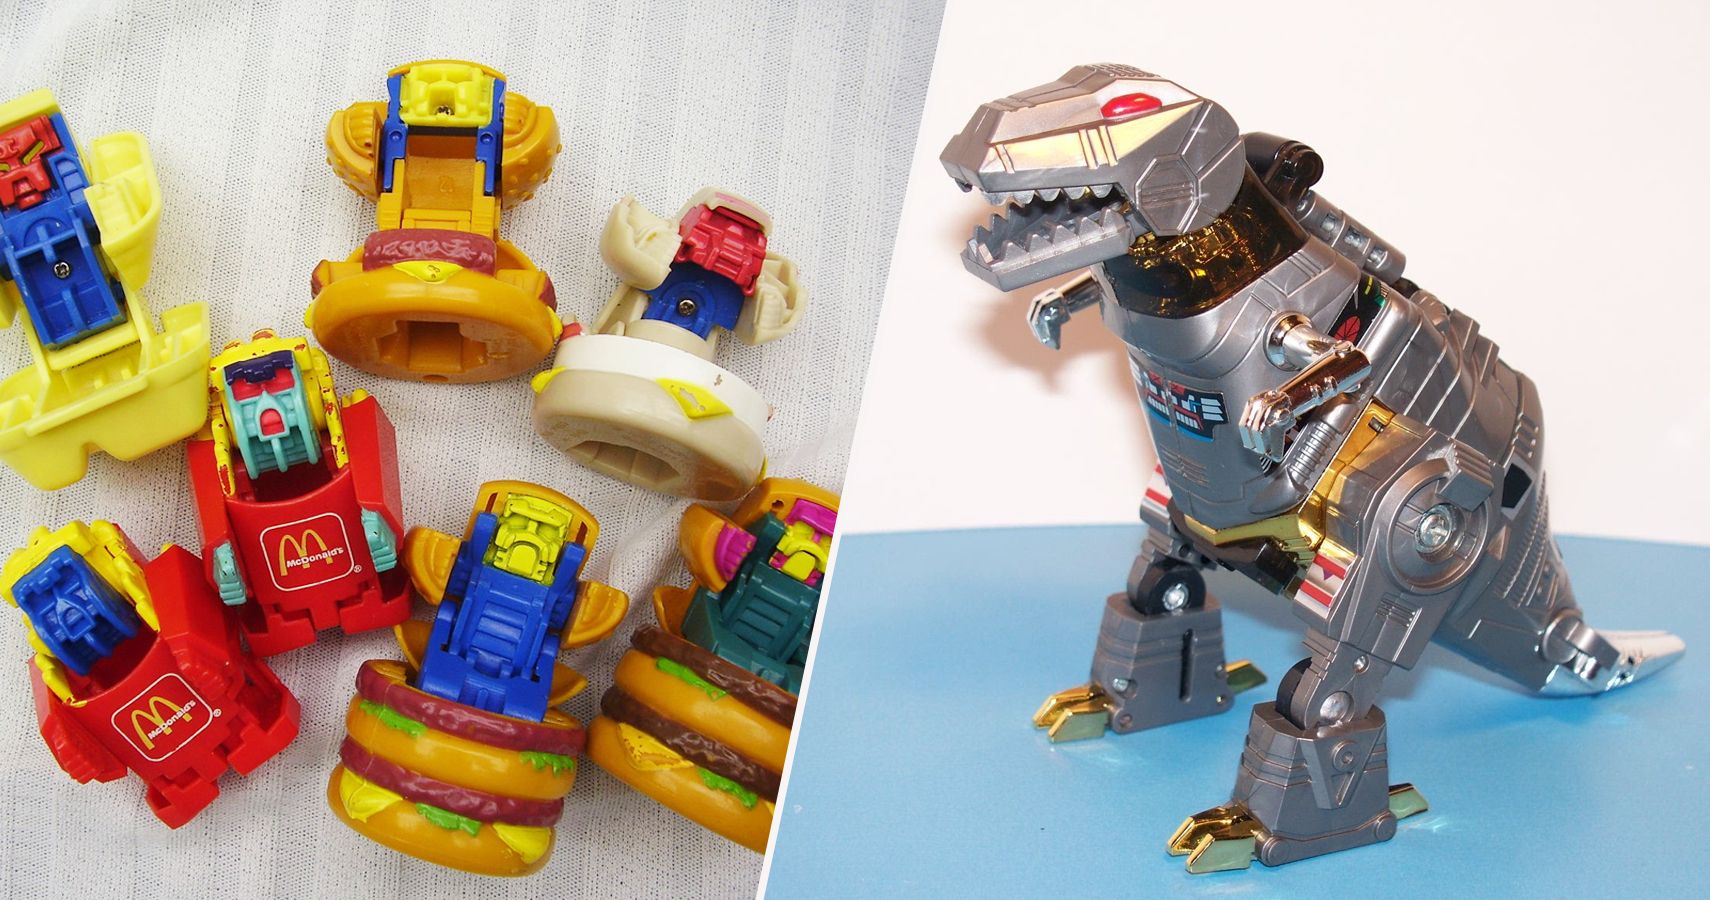 The 15 Weirdest Transformers Toys (And The 15 Best)